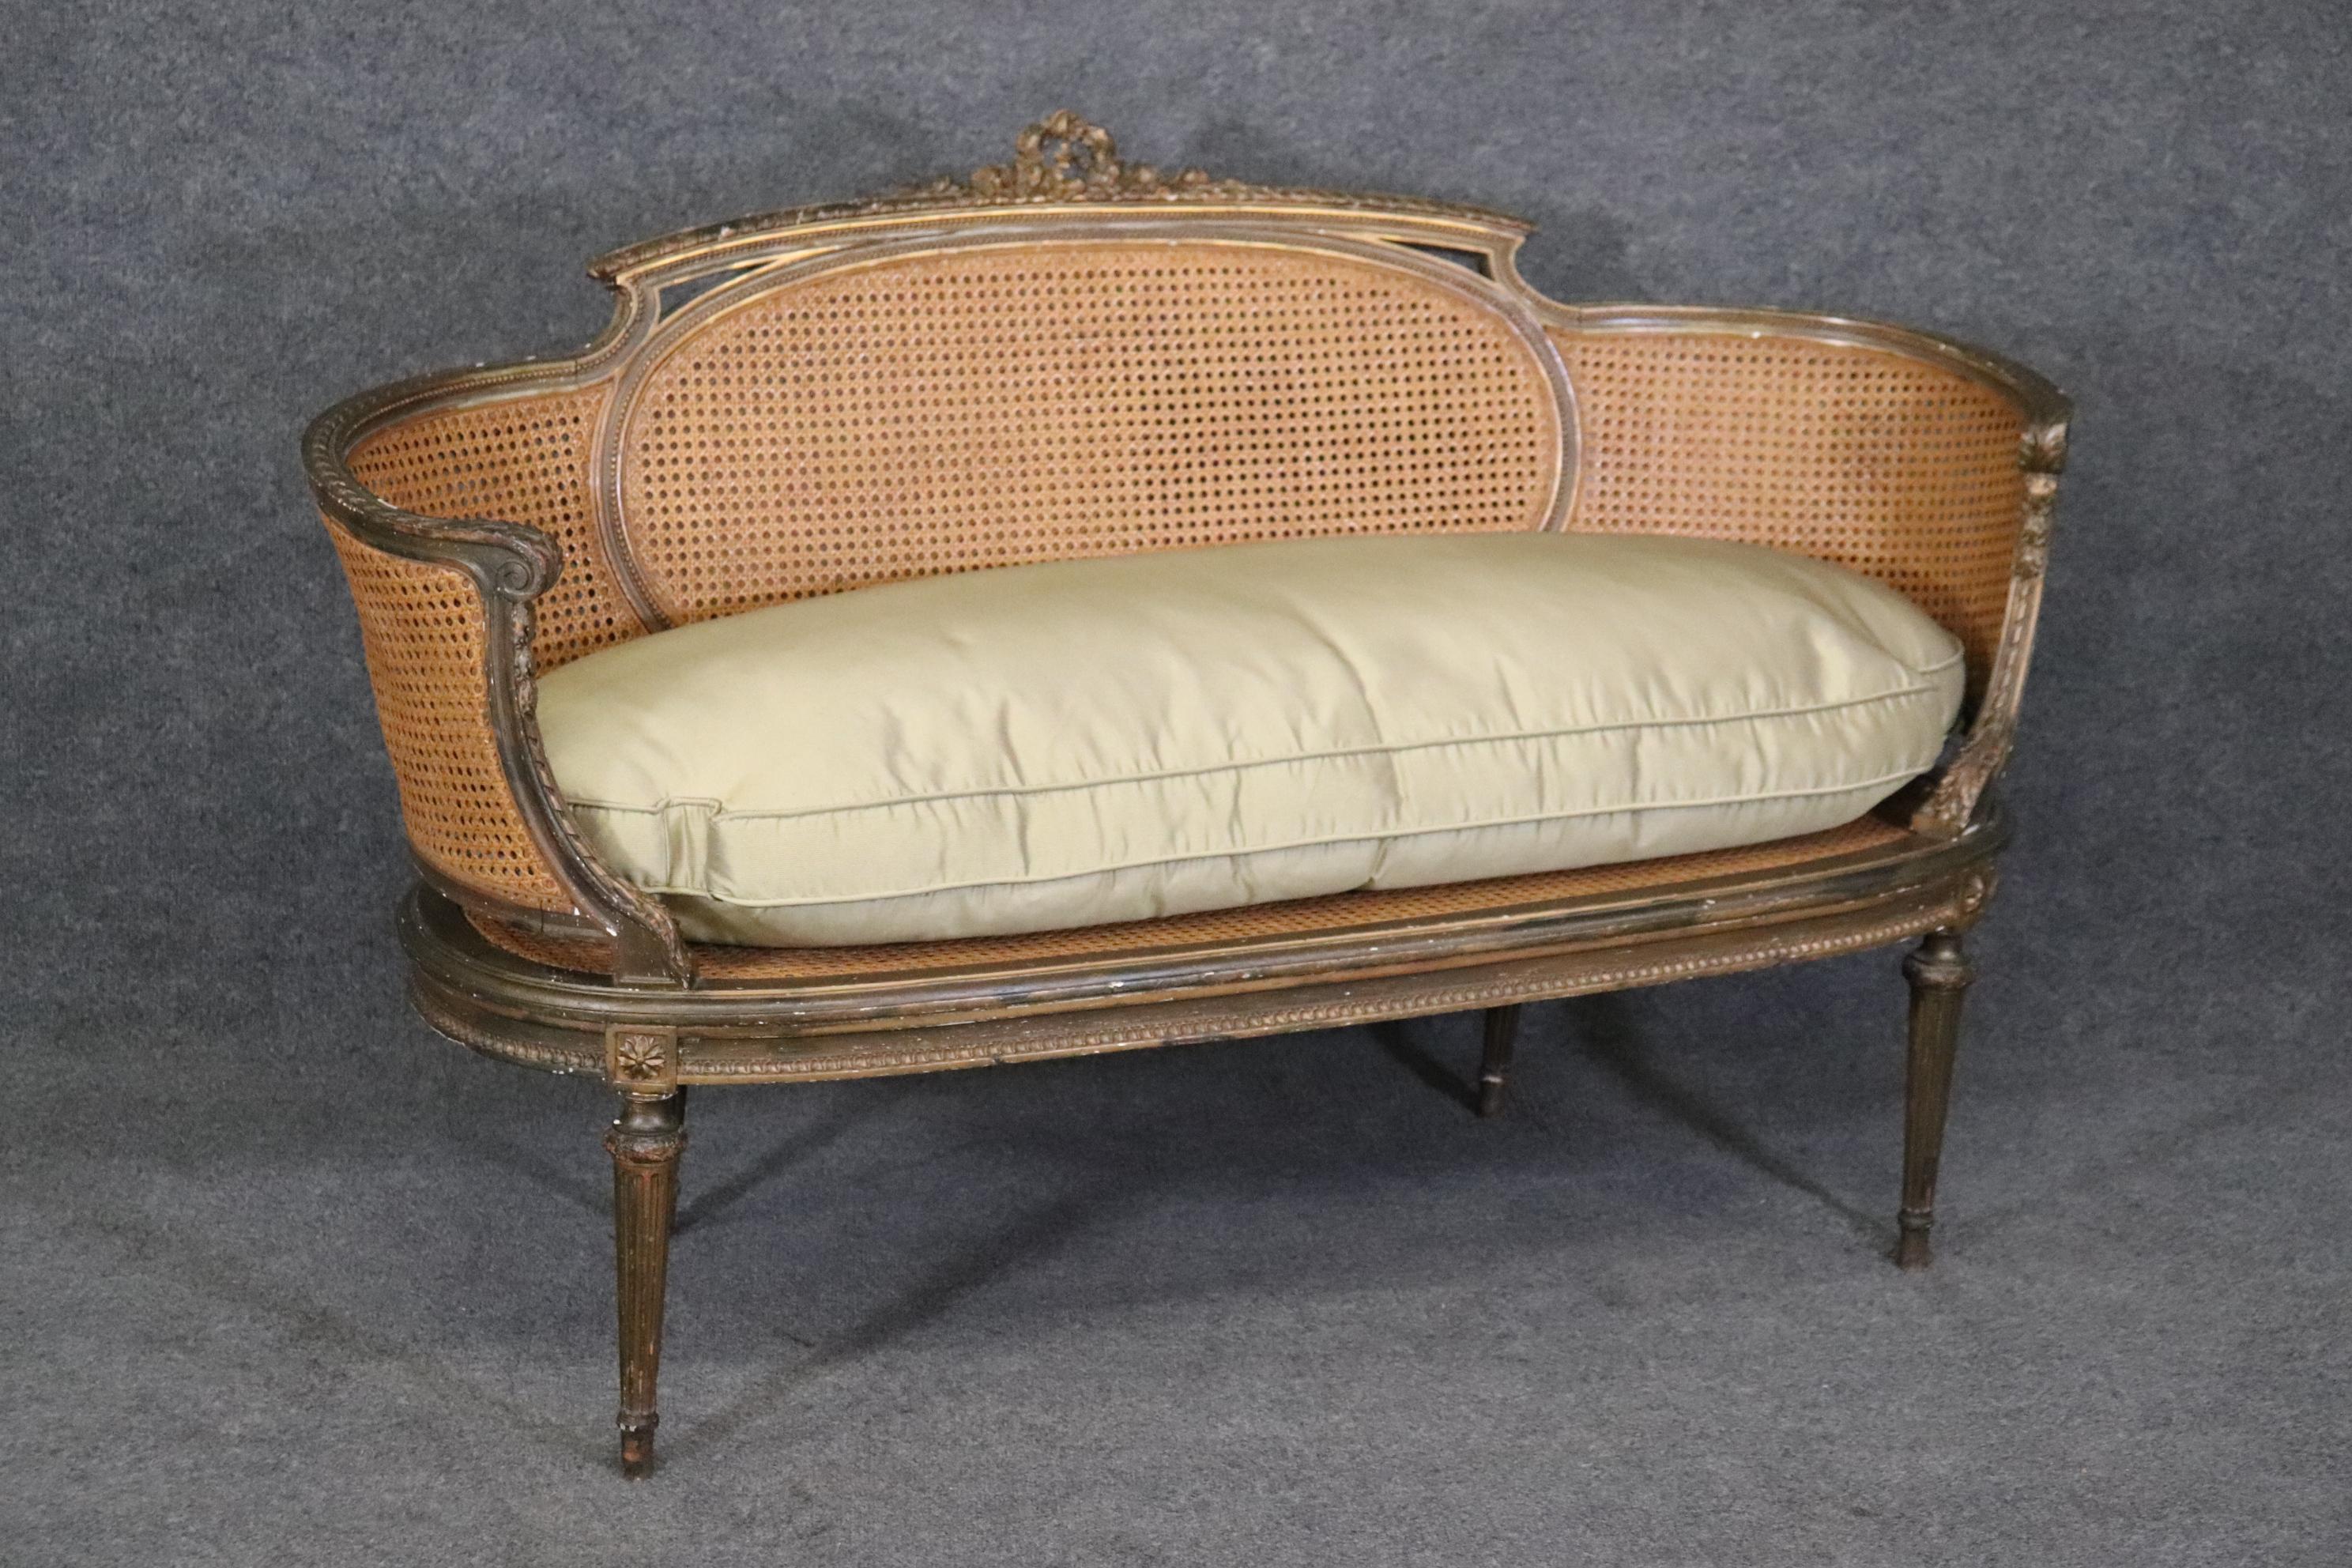 This is a wonderful settee with a curved frame and beautiful caned back. The settee is done in an antique bronzed gilded finish and is in good condition with wonderful carving and a great cushion that appears to be silk. The piece measures 36.75